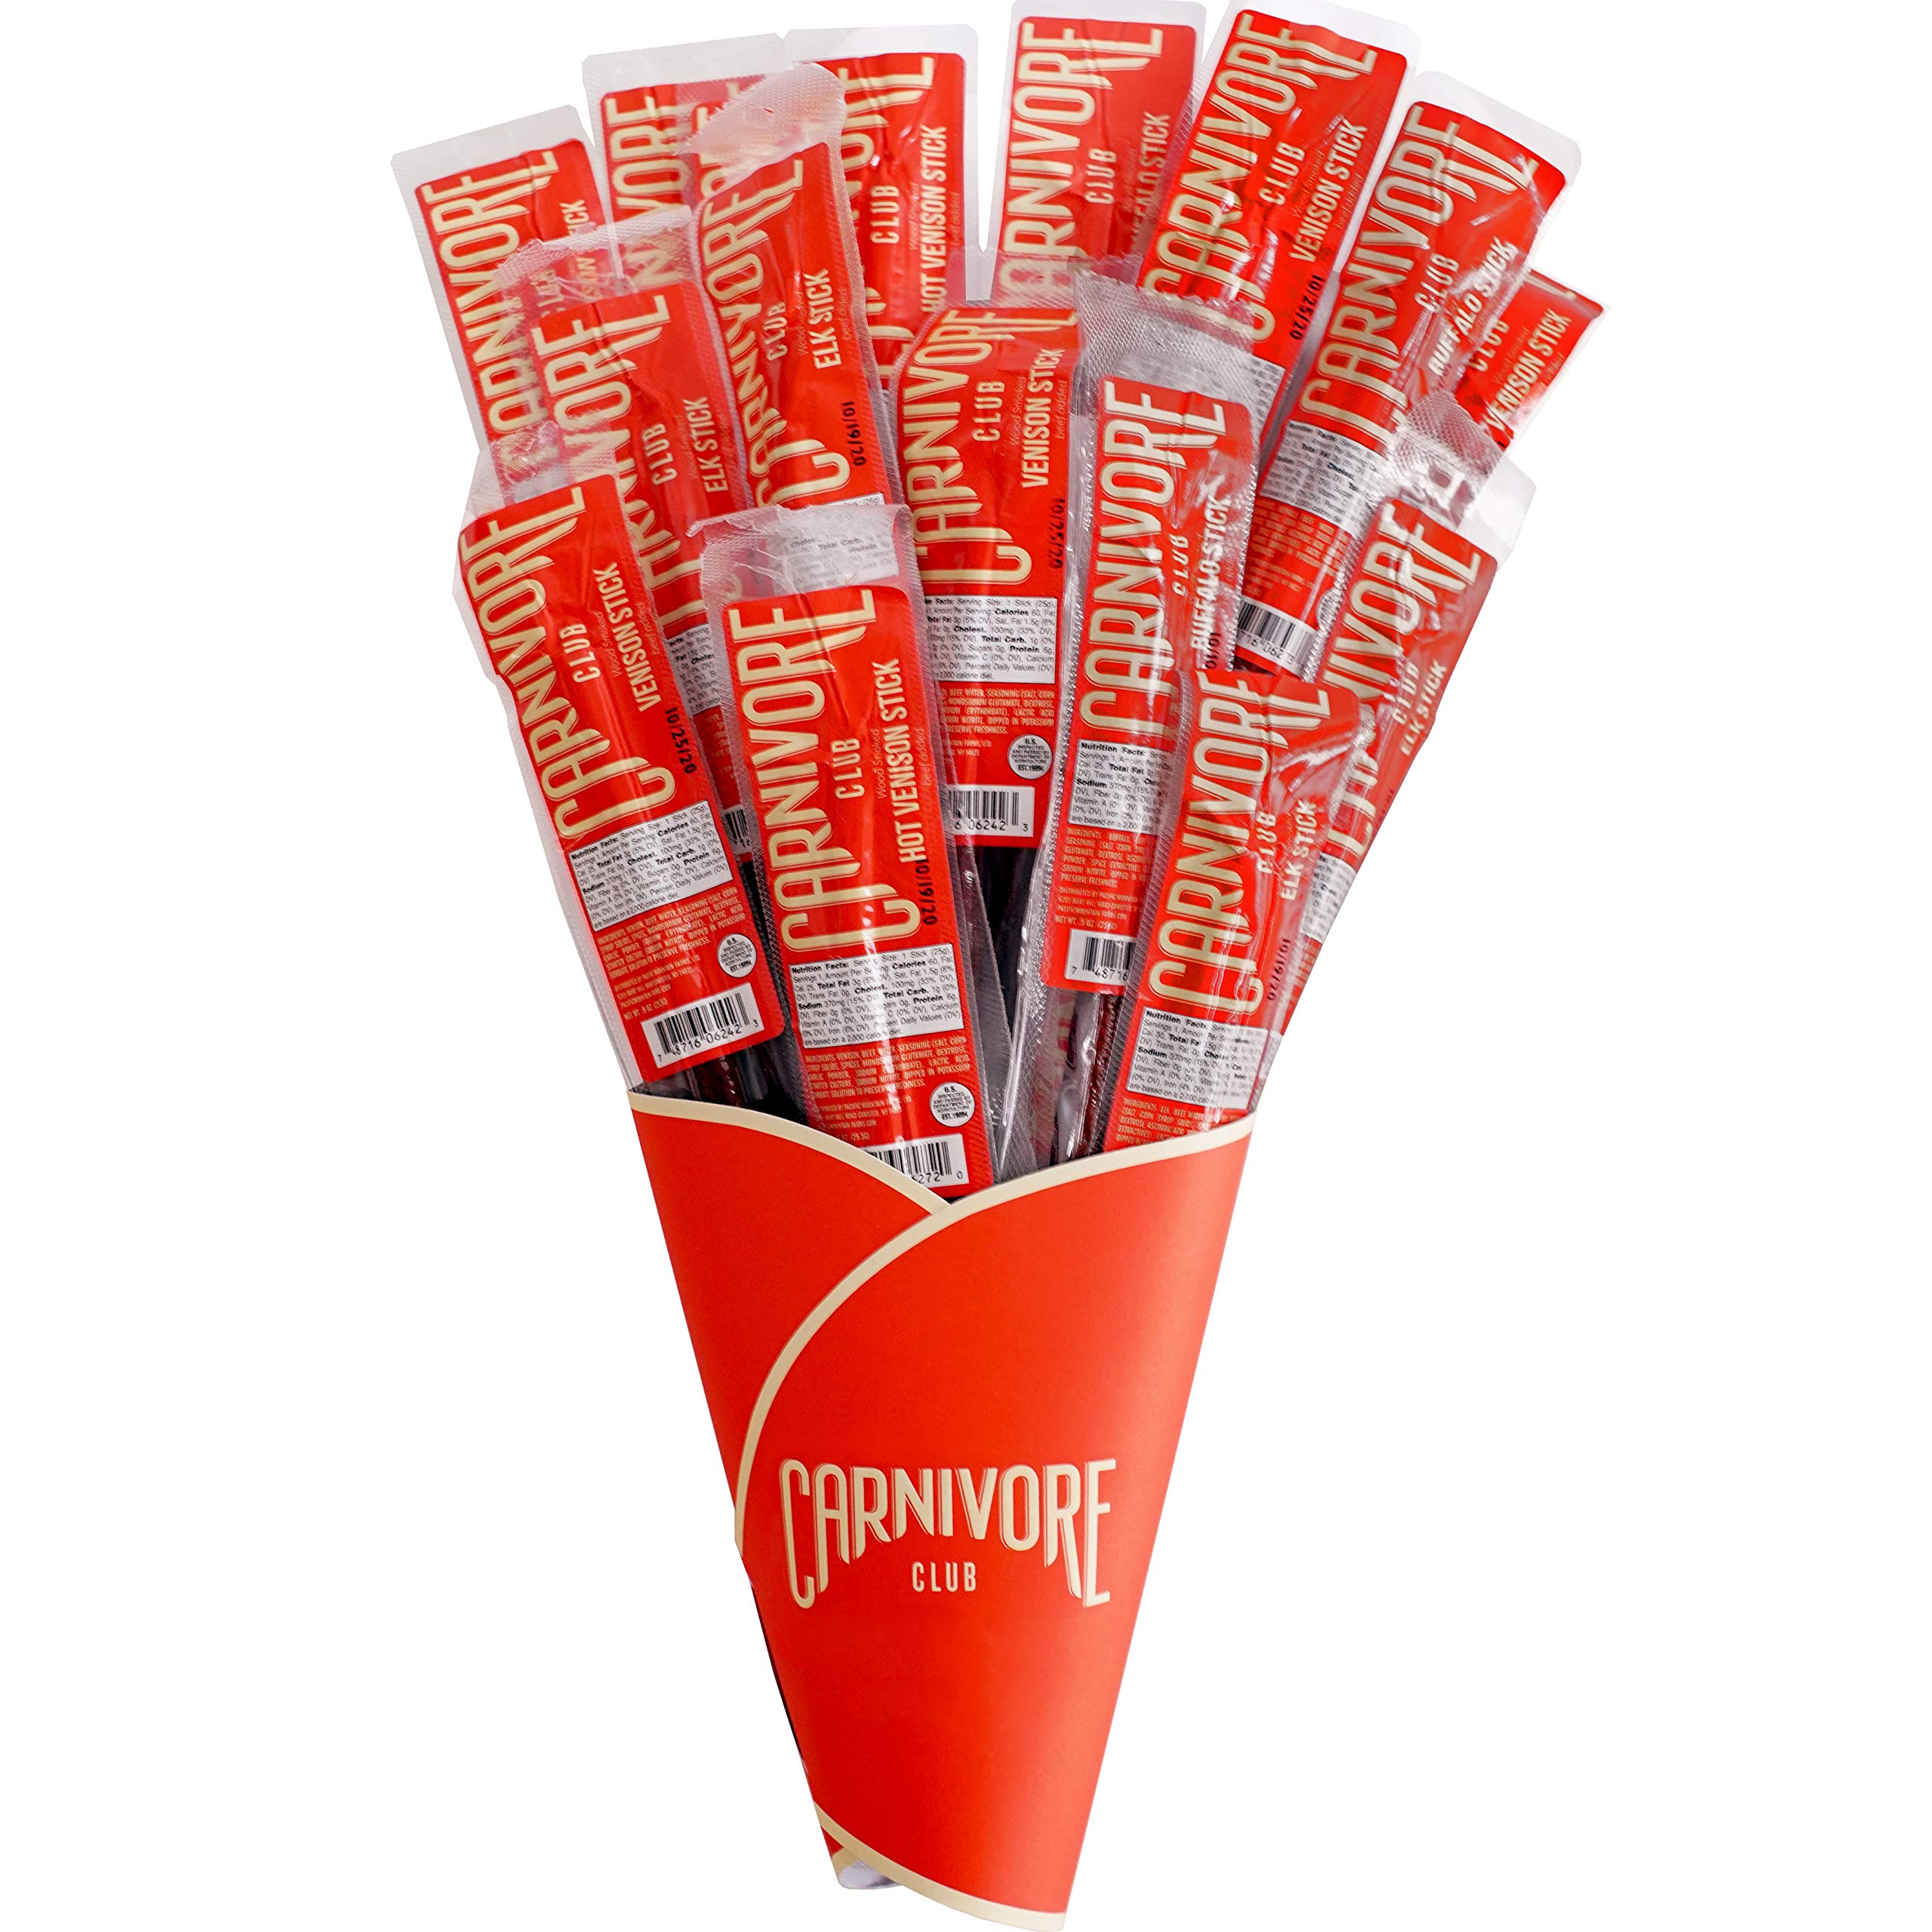 Carnivore Club Exotic Jerky Bouquet - Includes 20 Delicious Exotic Meat  Sticks in 4 Flavors - Jerky Lover